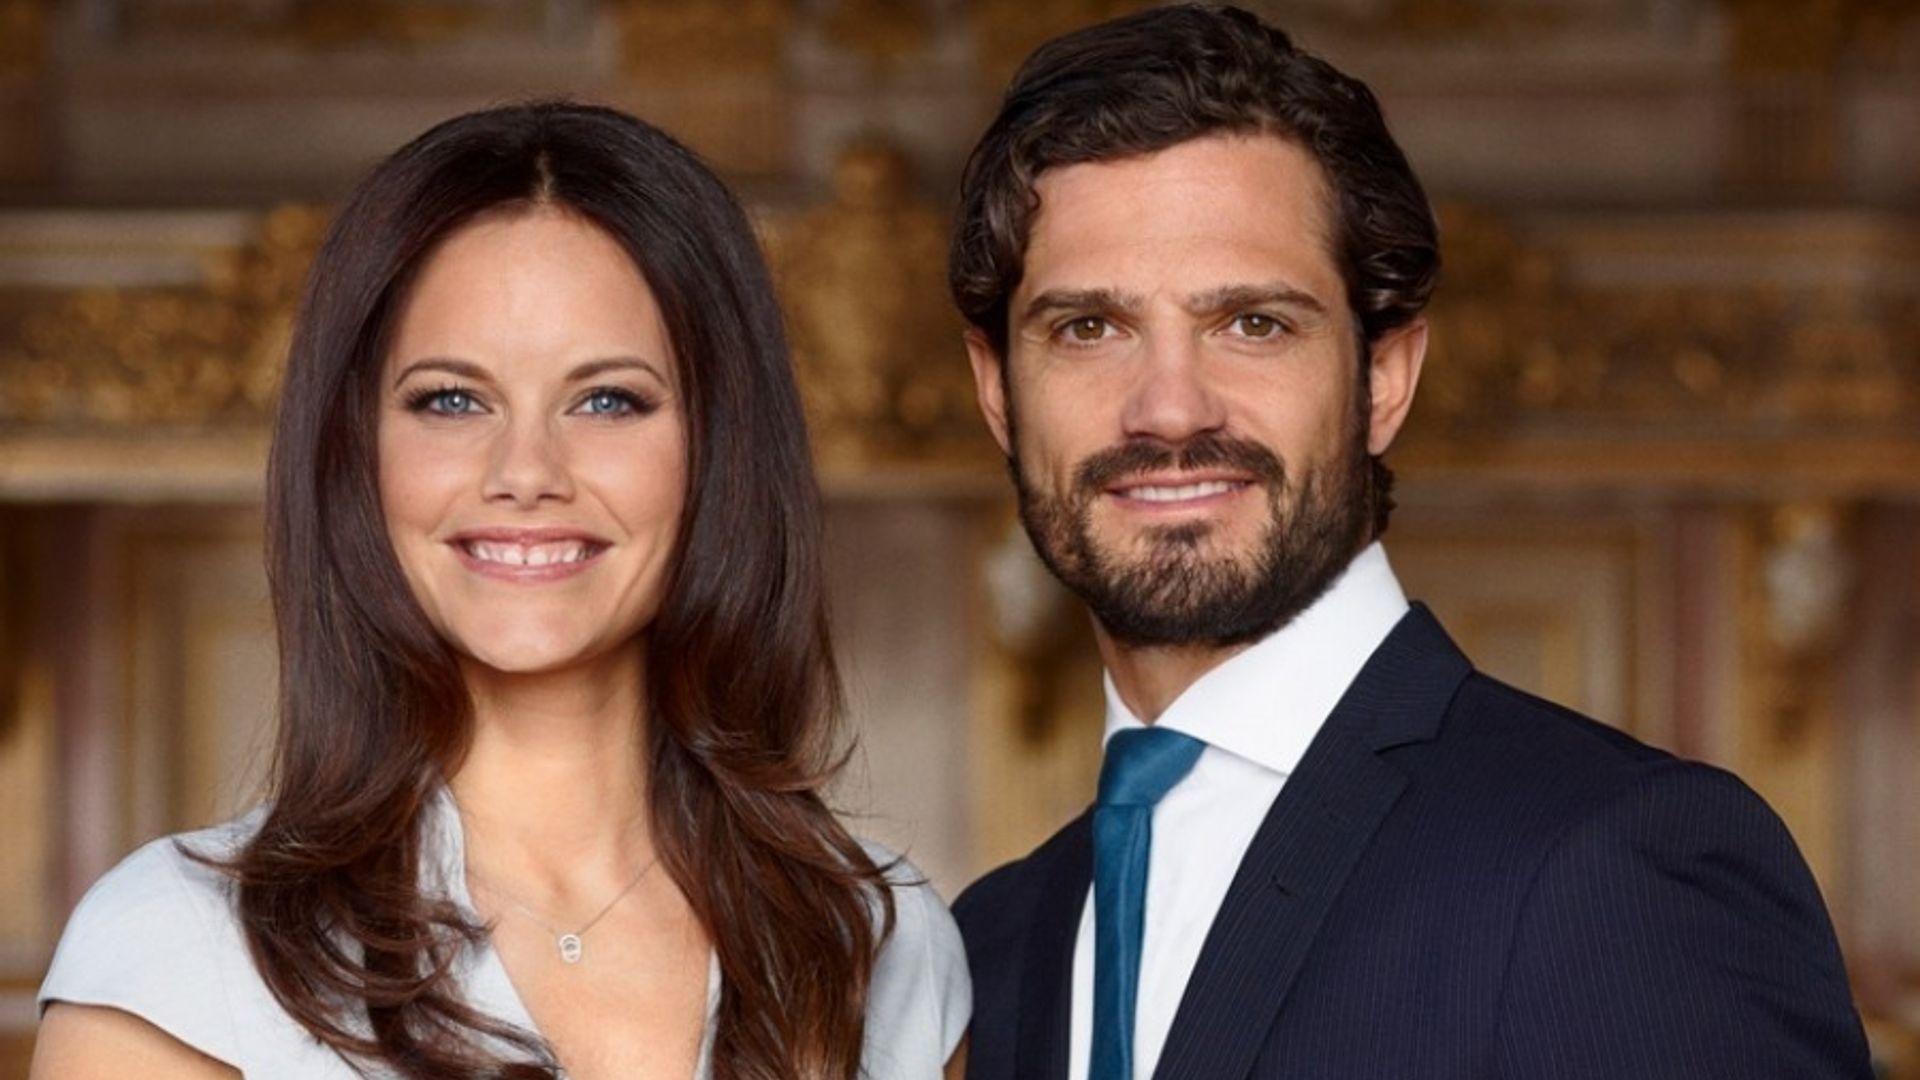 Sweden's Prince Carl Philip and Princess Sofia welcome second baby